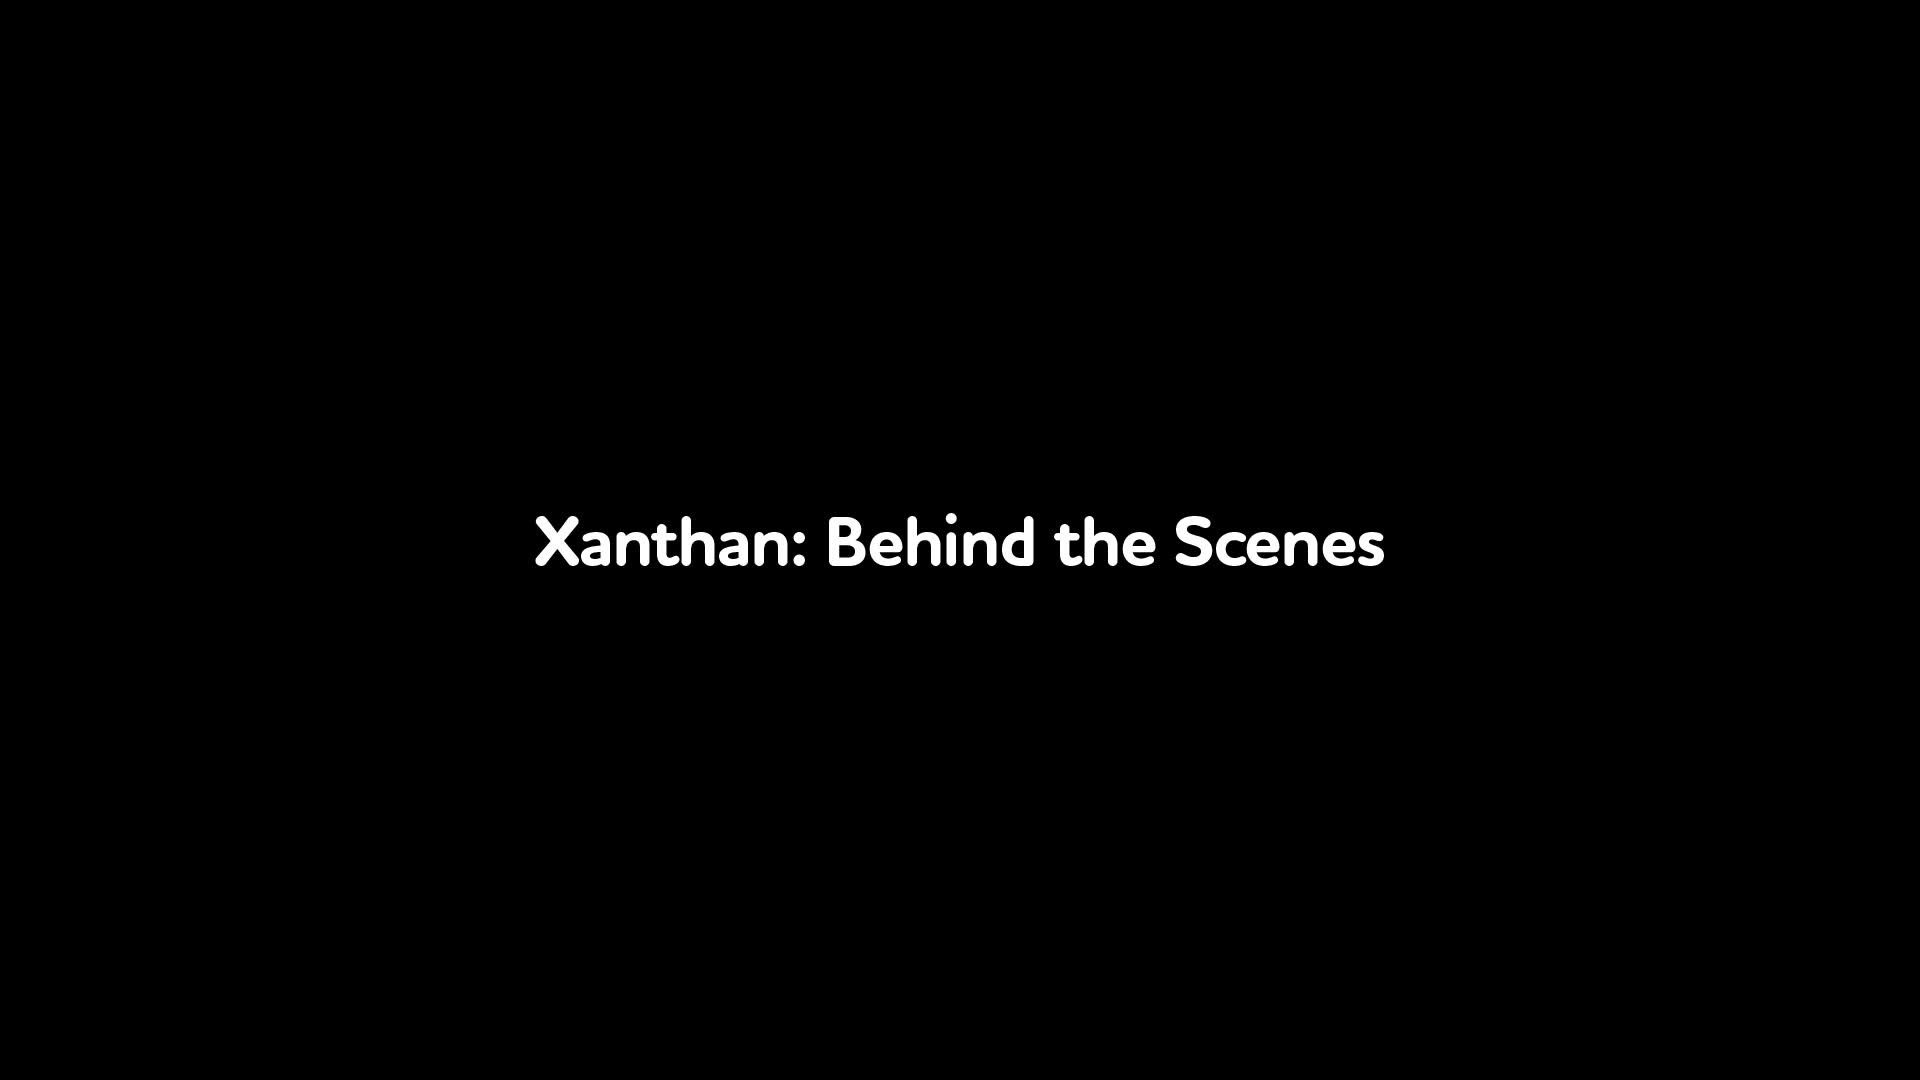 Xanthan: Behind the Scenes